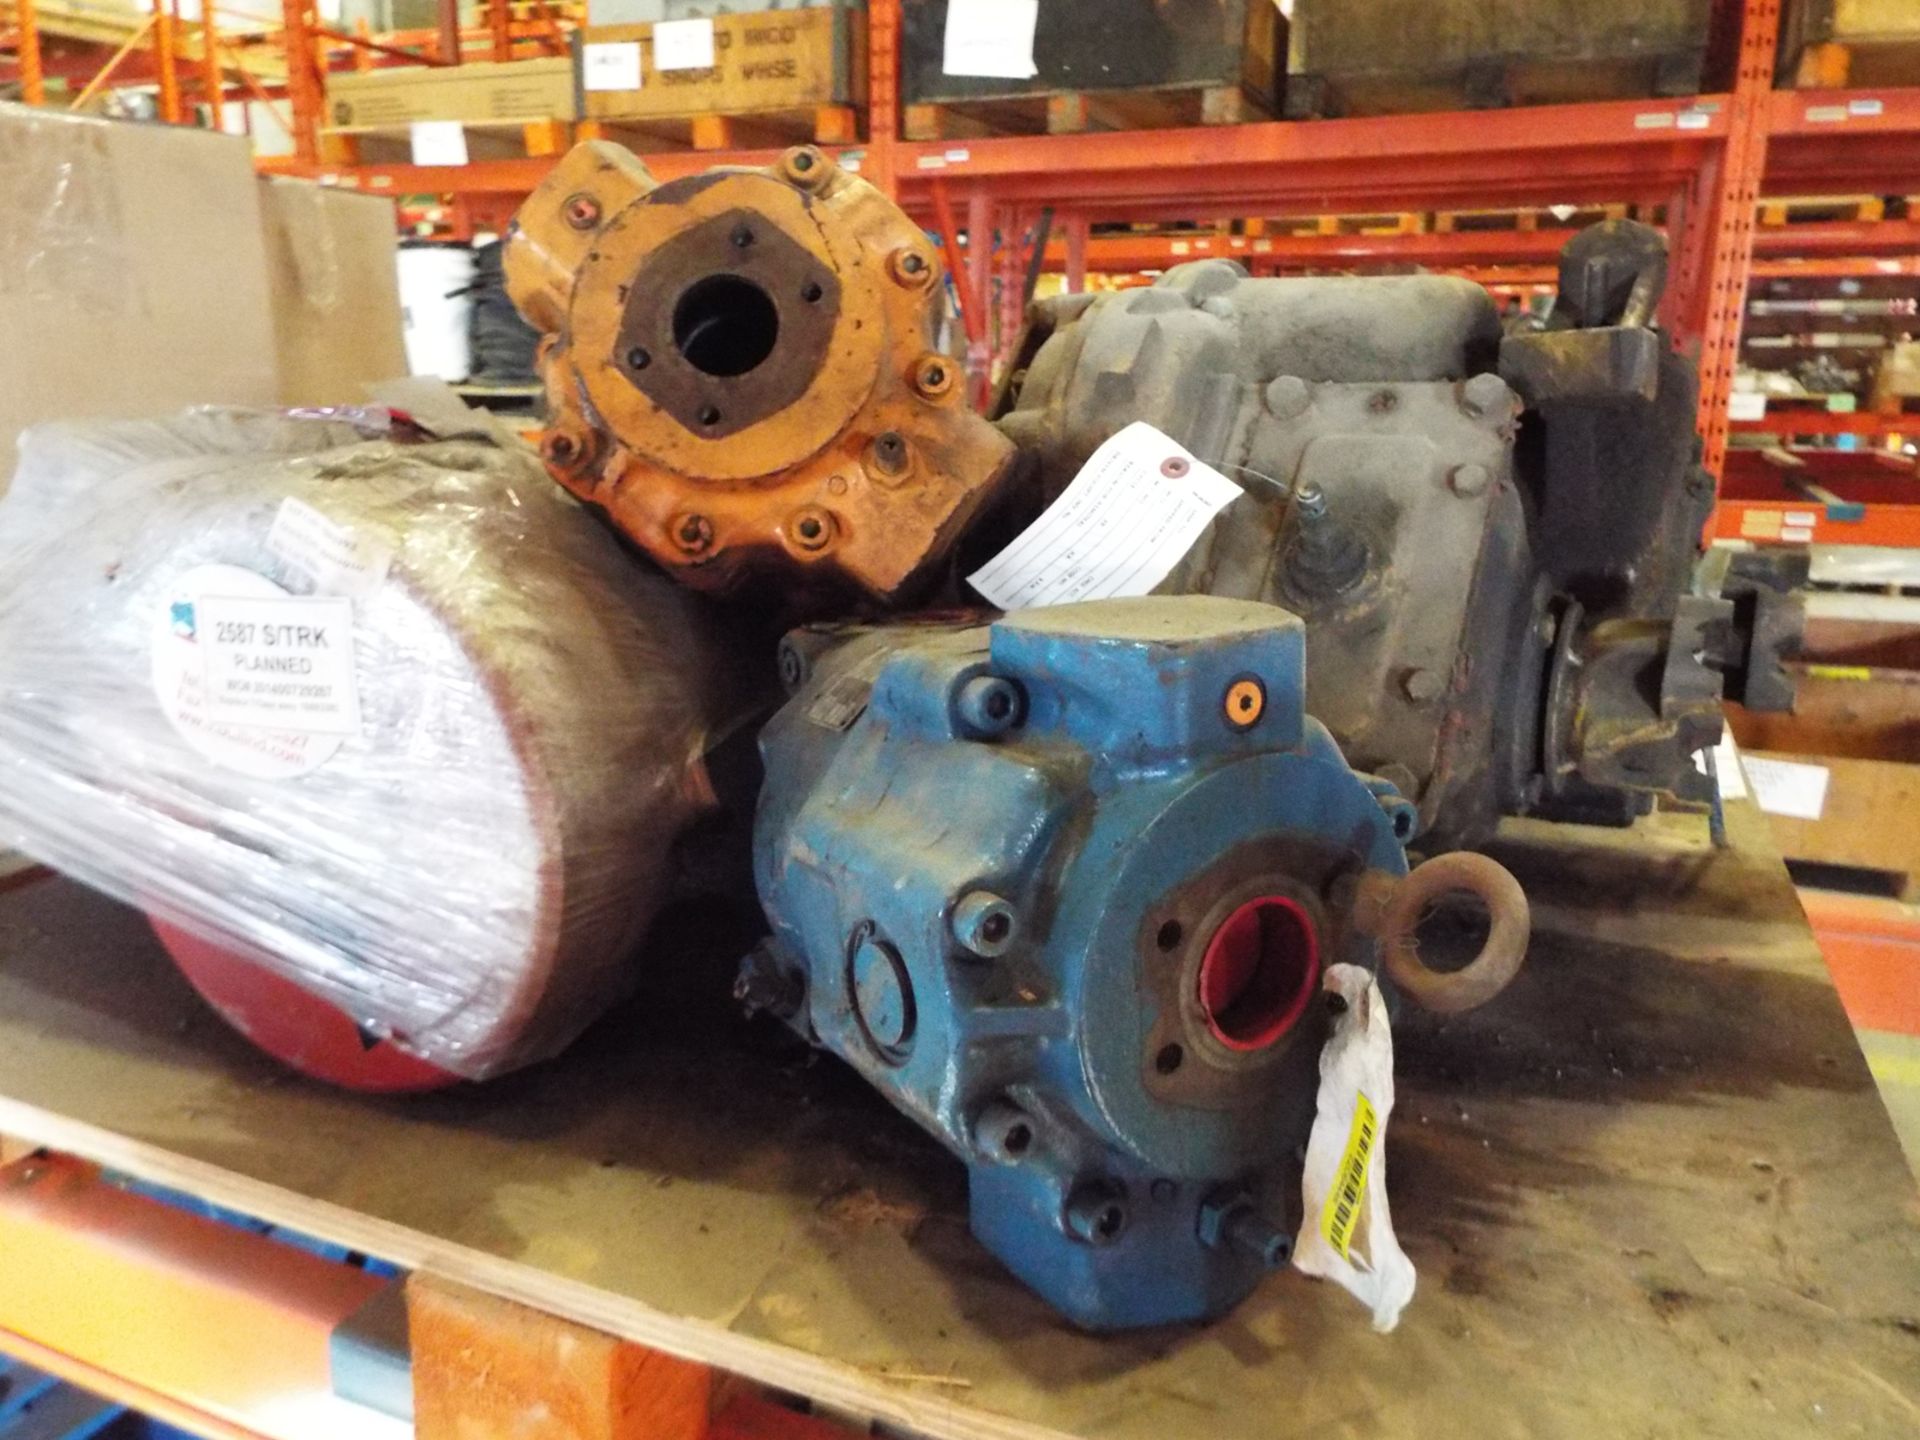 LOT/ TIMBERJACK TRANSFER CASE, PARKER PAVC100R42 PUMP WITH 3000 PSI MAX, & PUMPS - Image 7 of 8